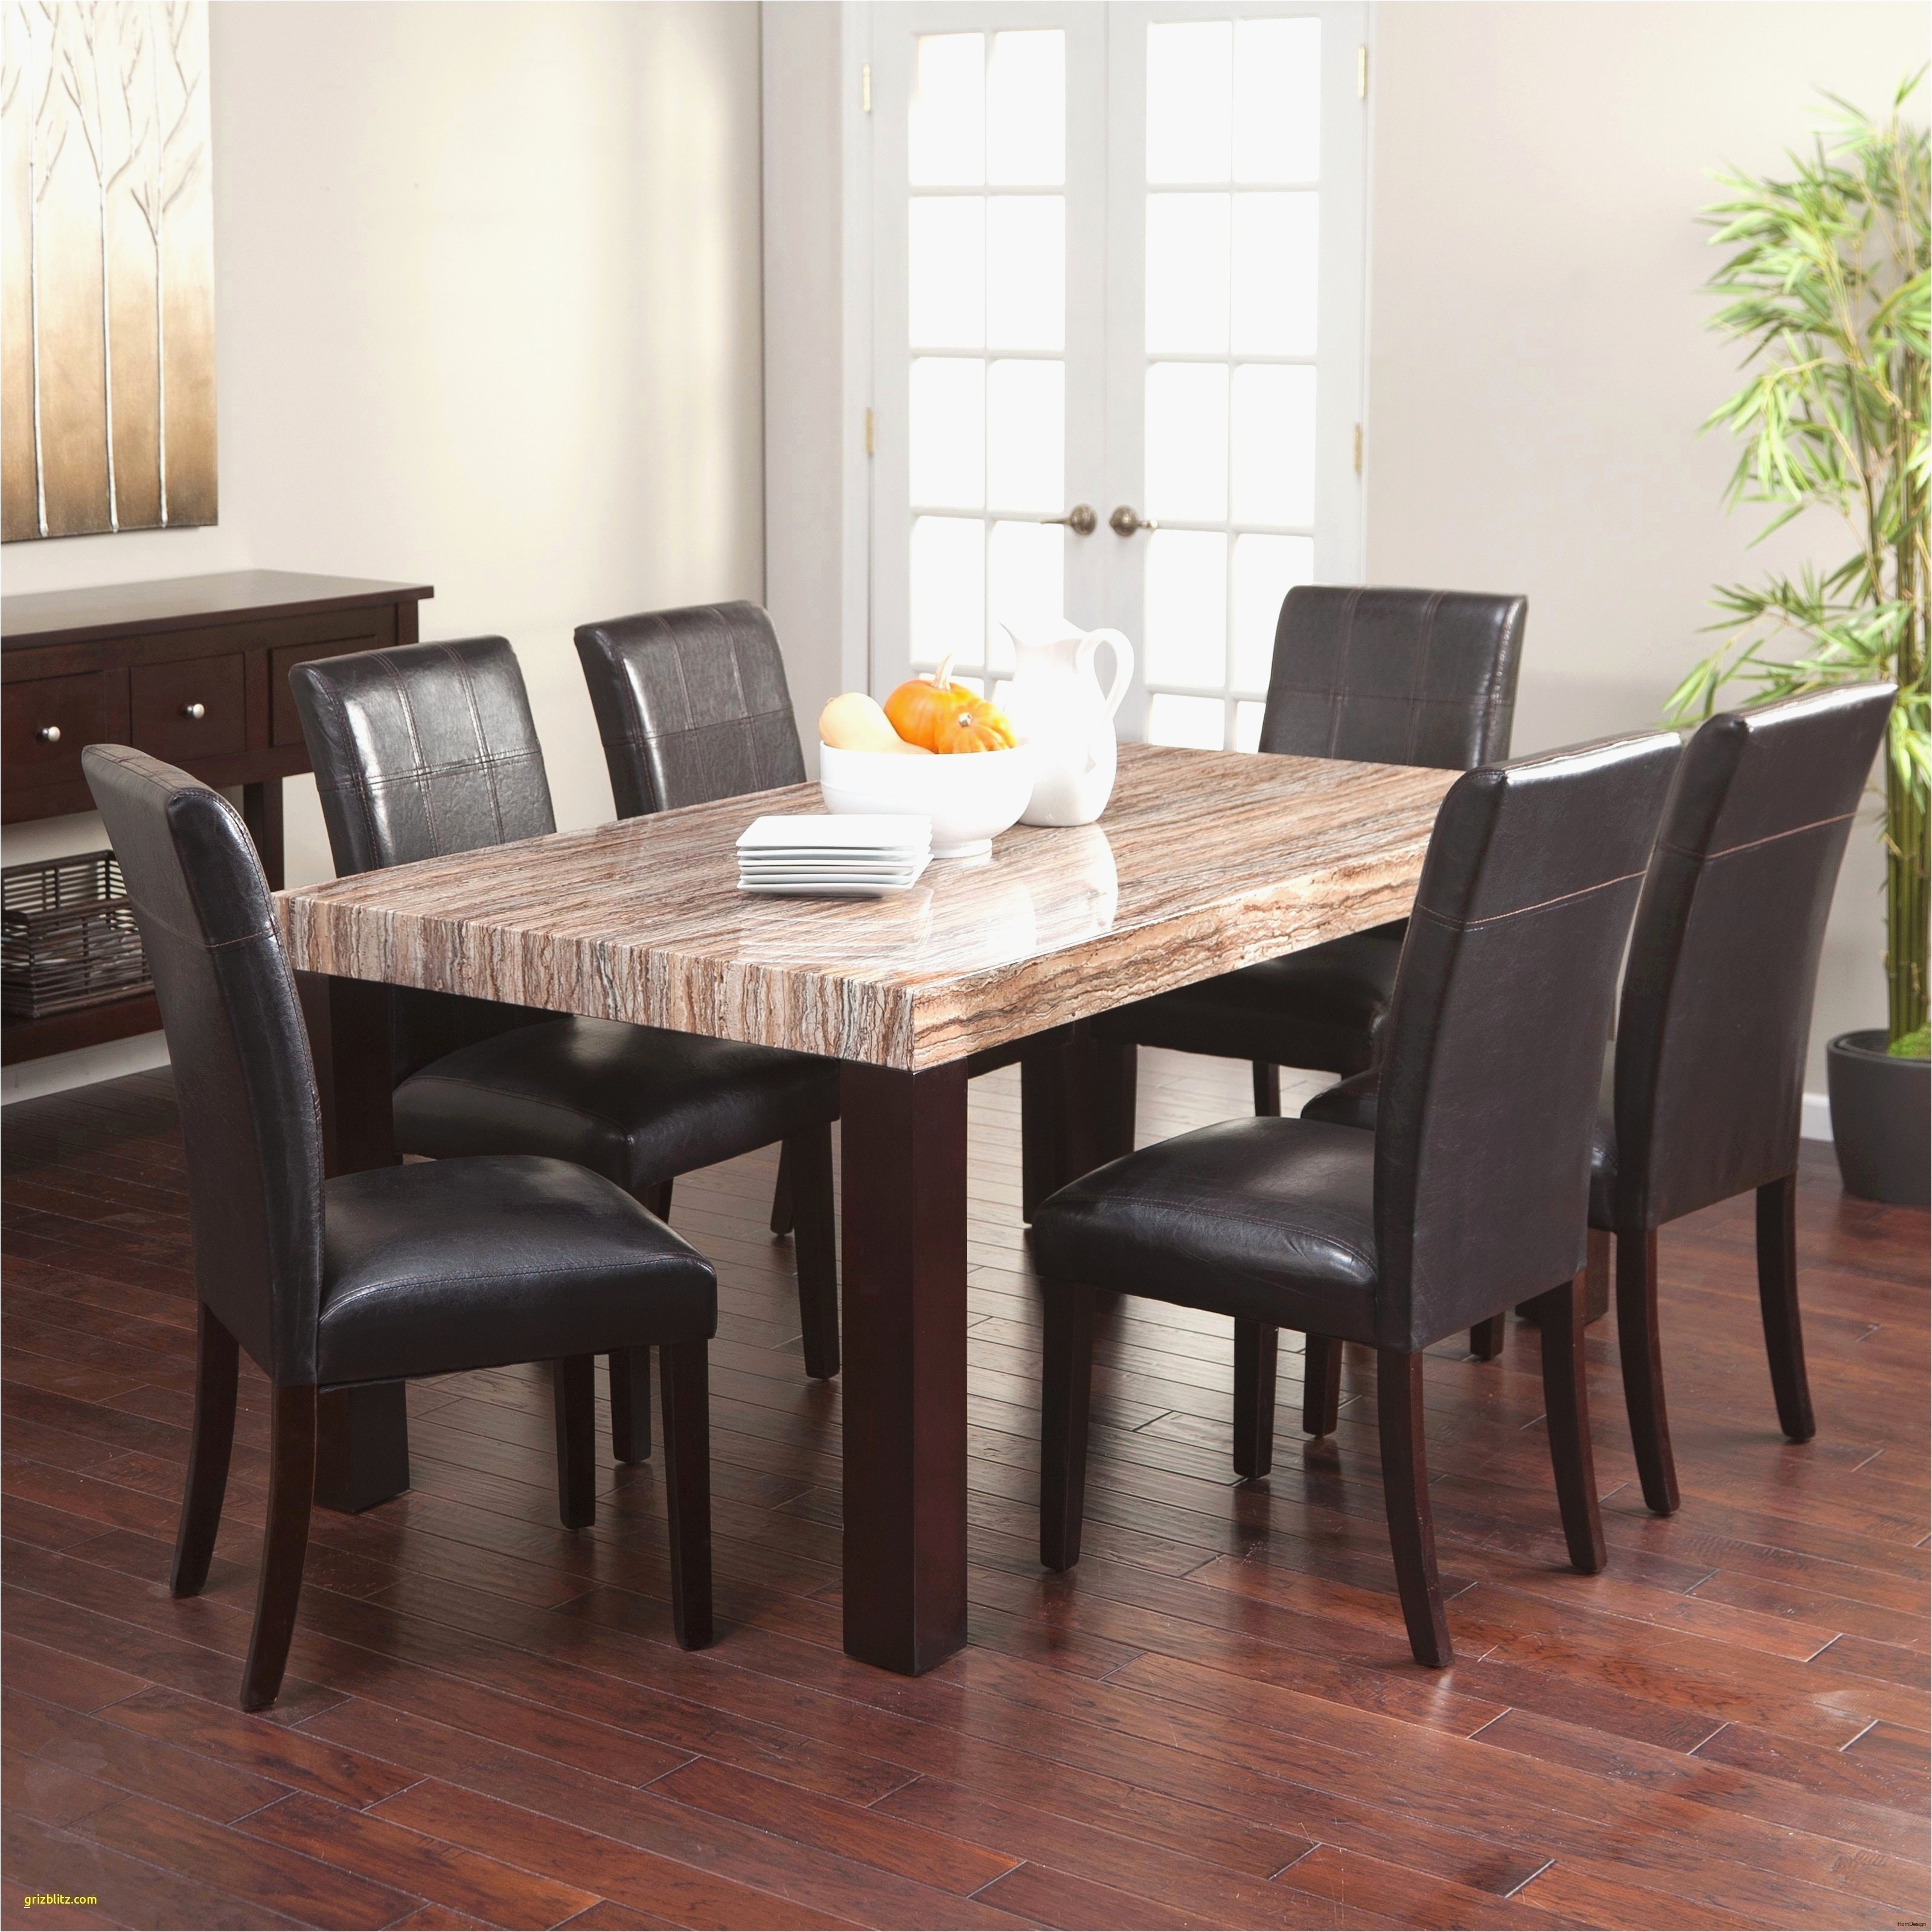 bobs furniture dining table unique bobs furniture kitchen sets lovely 17 awesome dining table with images